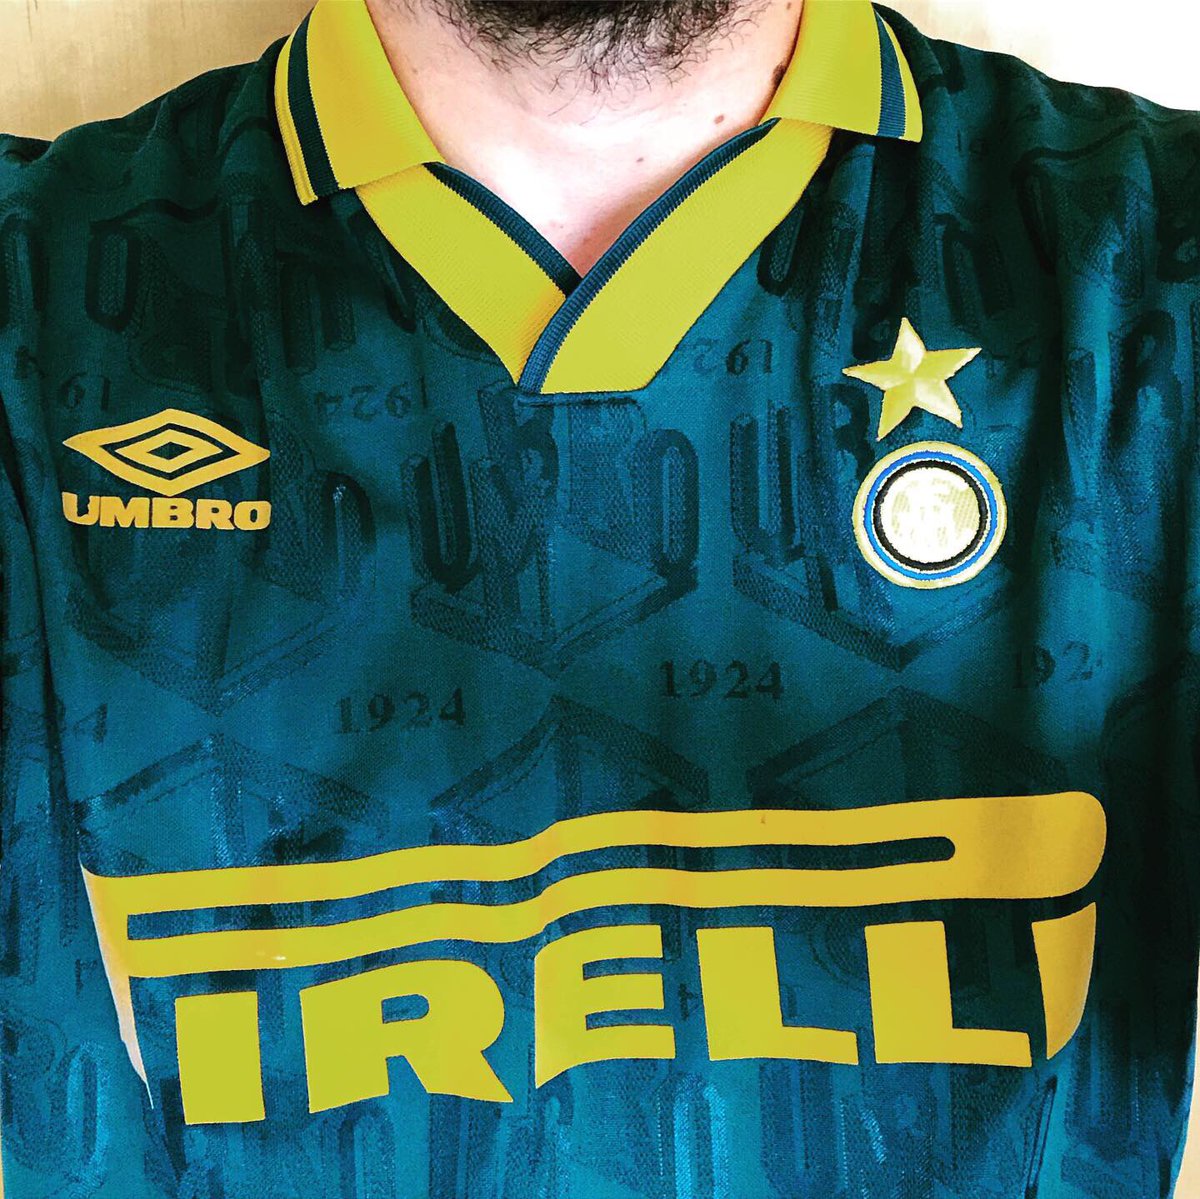 . @inter Training Kit, 1995/96 @umbroThis exquisite training kit featured in some summer transfer announcements that season, such as Roberto Carlos as he joined for his unfortunate stint at Inter Milan. The diamond pattern contains a reference to Umbro’s foundation year